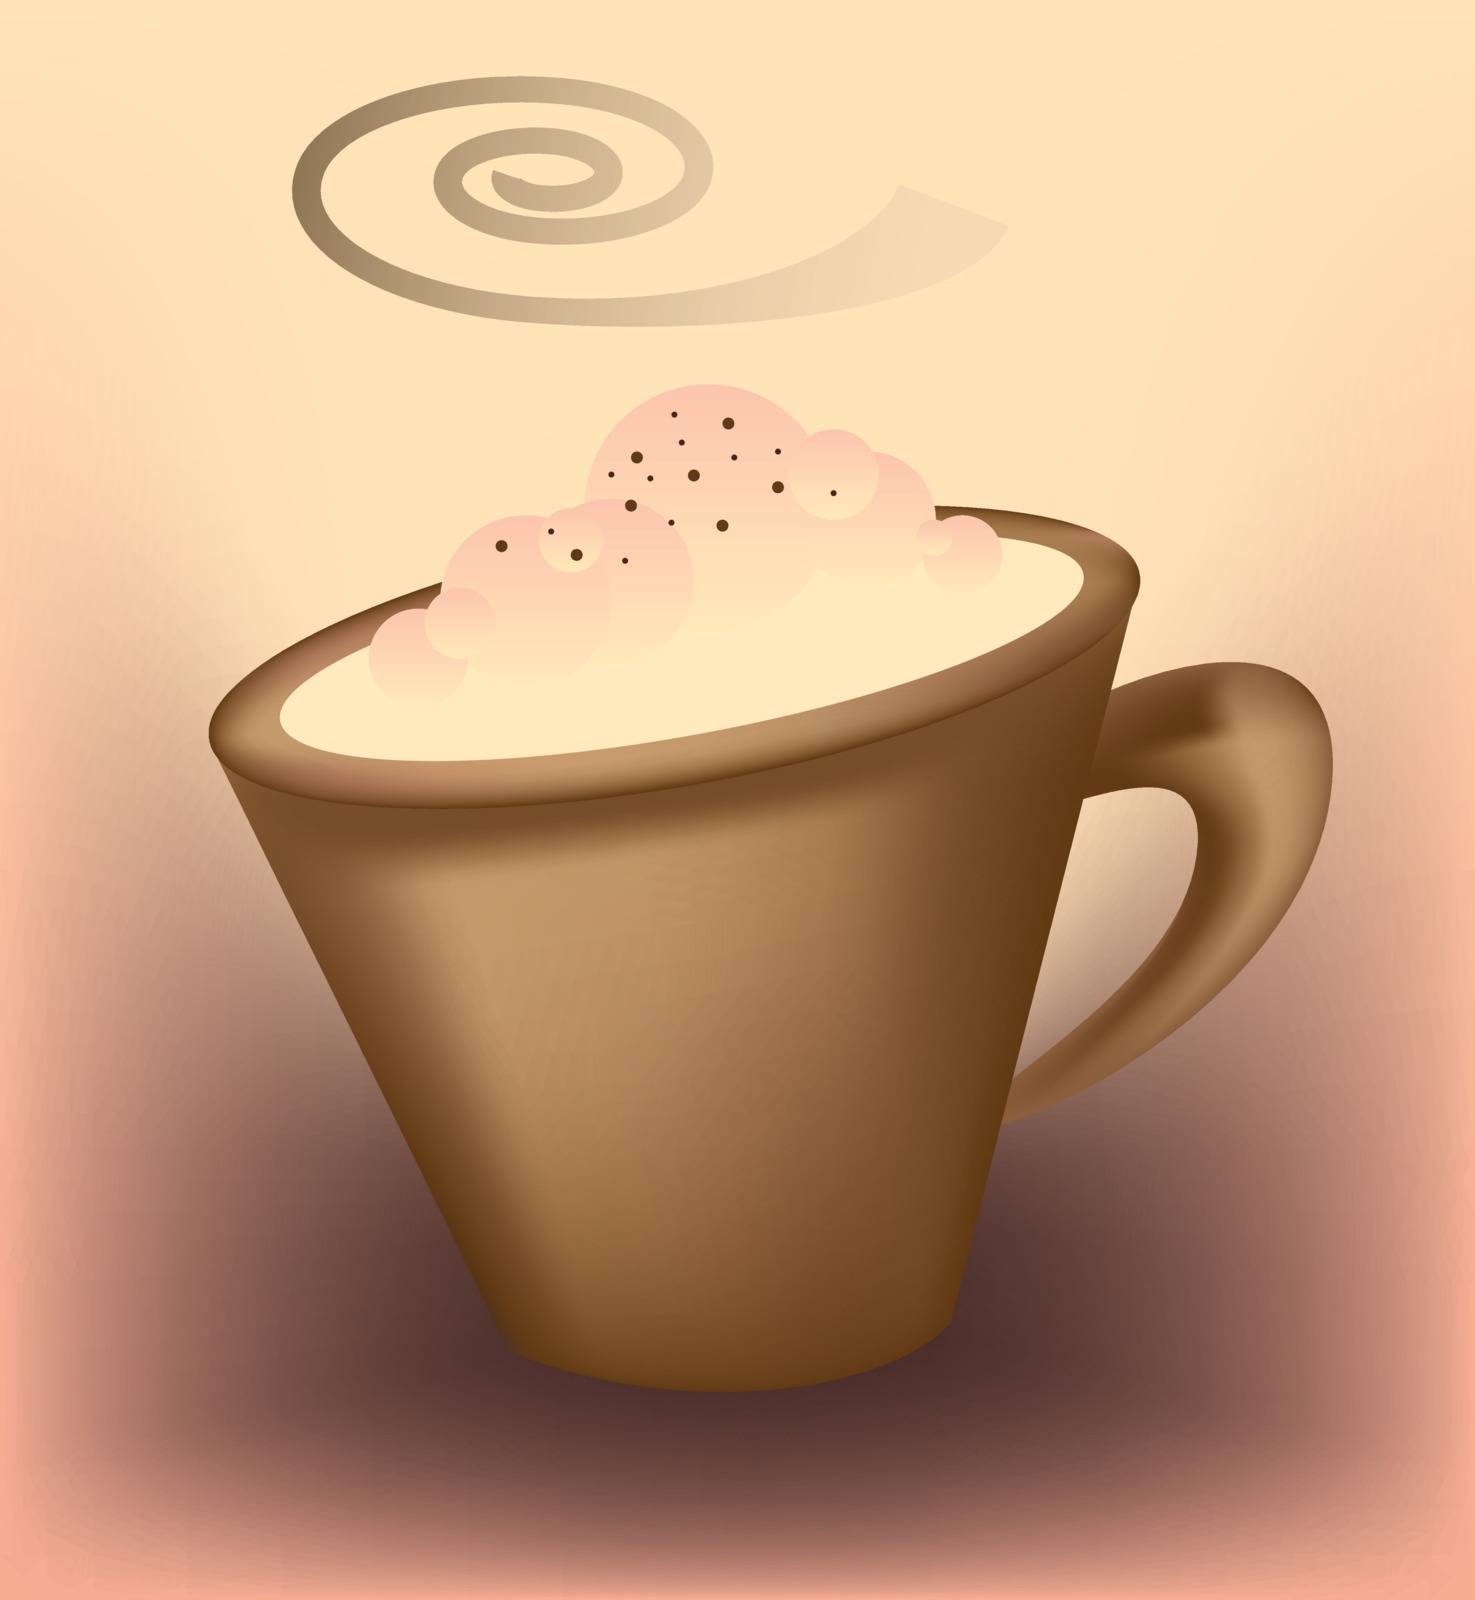 Cup of cappuccino by Deserbra